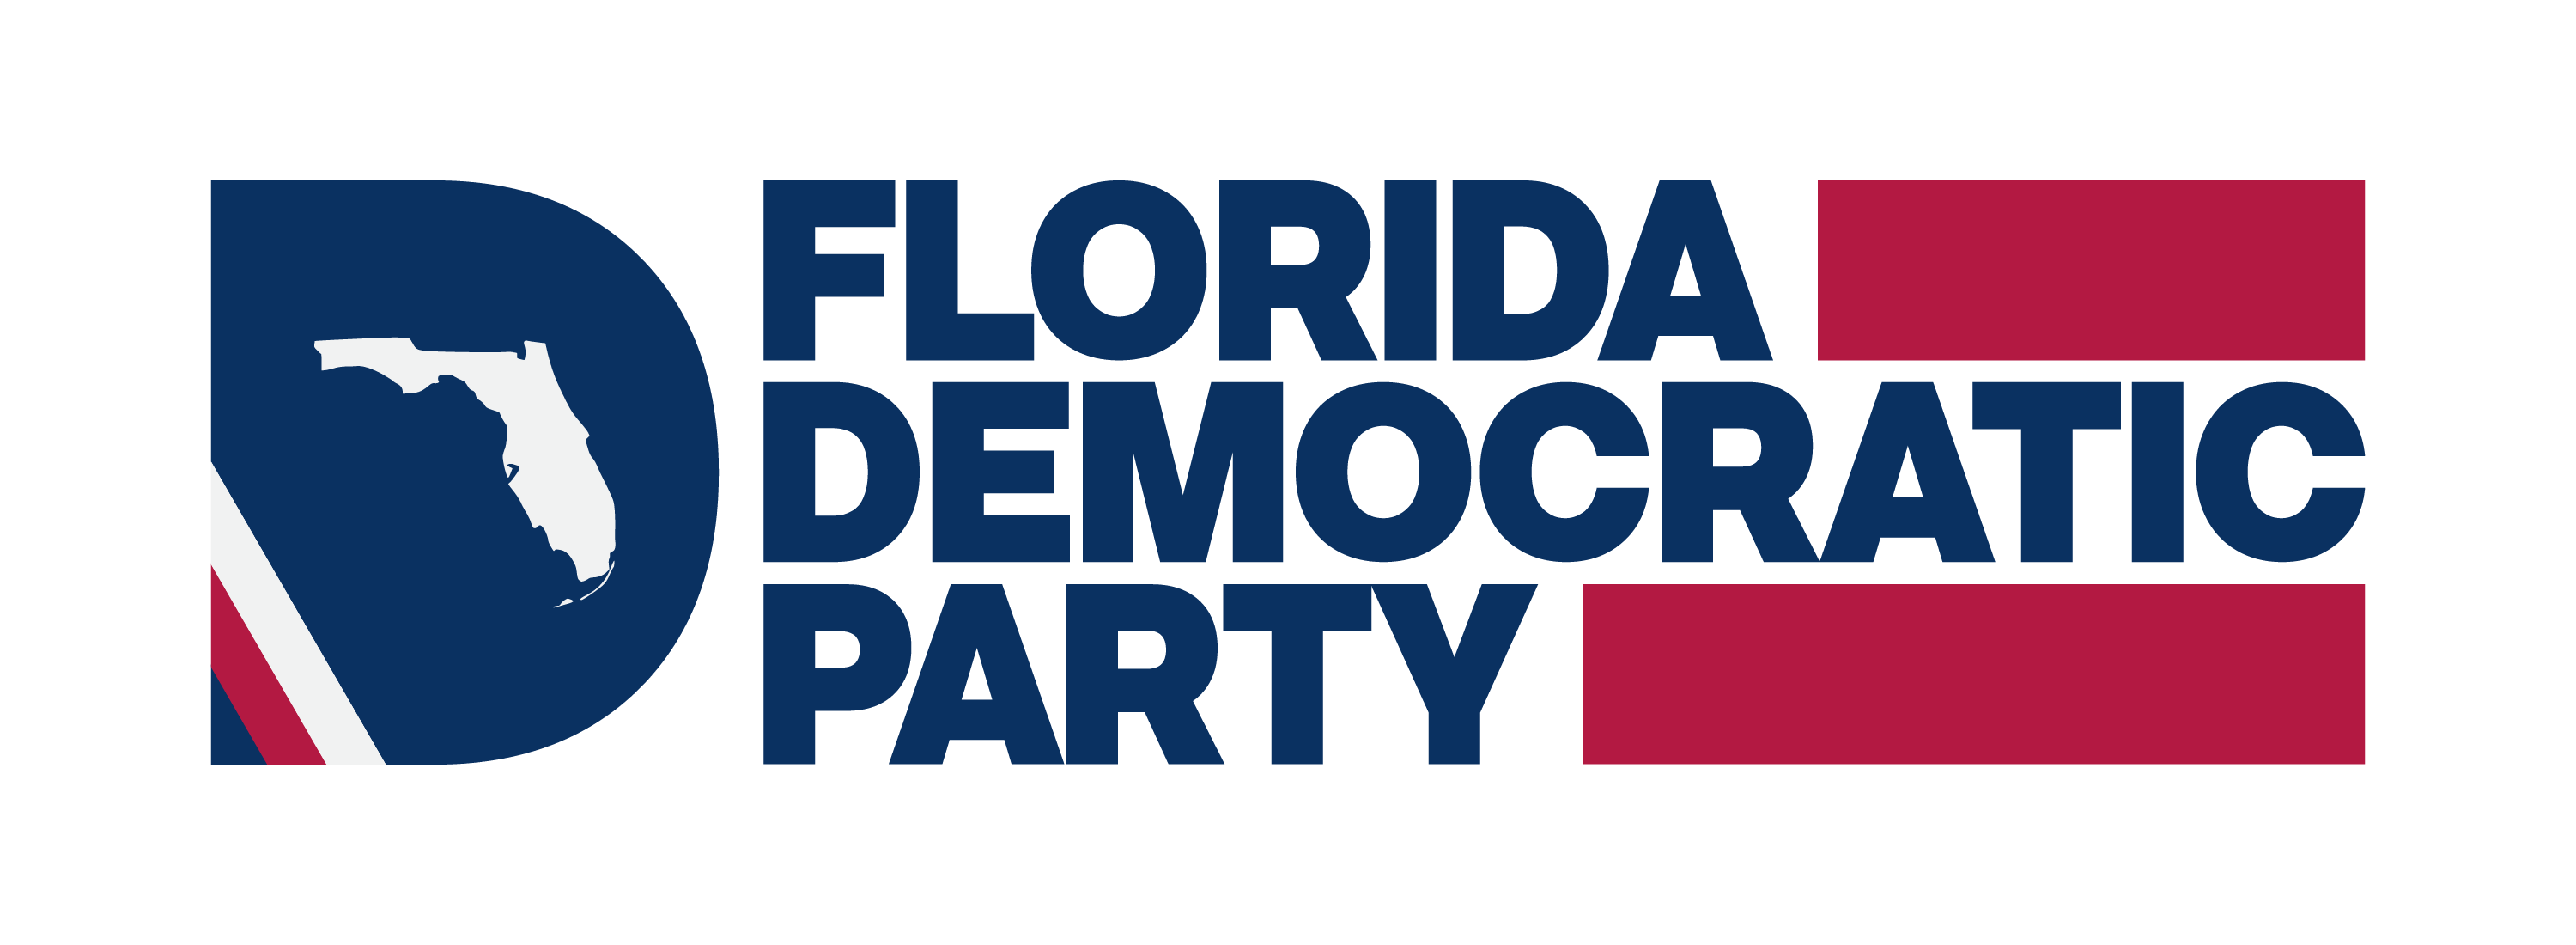 scps-back-to-school-drive-through-august-31-florida-democratic-party